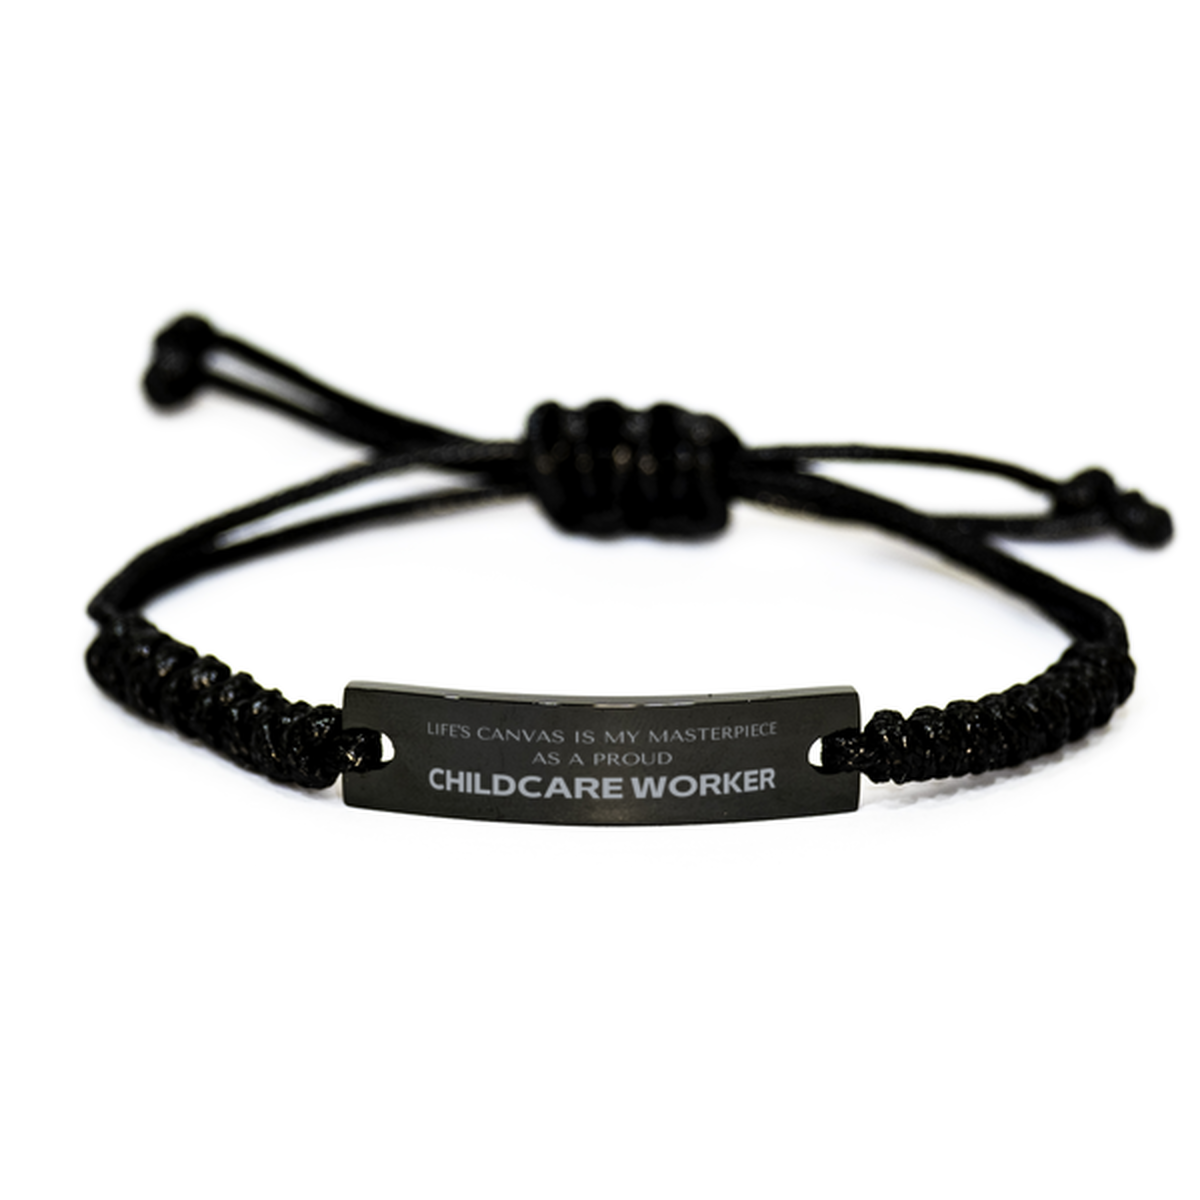 Proud Childcare Worker Gifts, Life's canvas is my masterpiece, Epic Birthday Christmas Unique Black Rope Bracelet For Childcare Worker, Coworkers, Men, Women, Friends